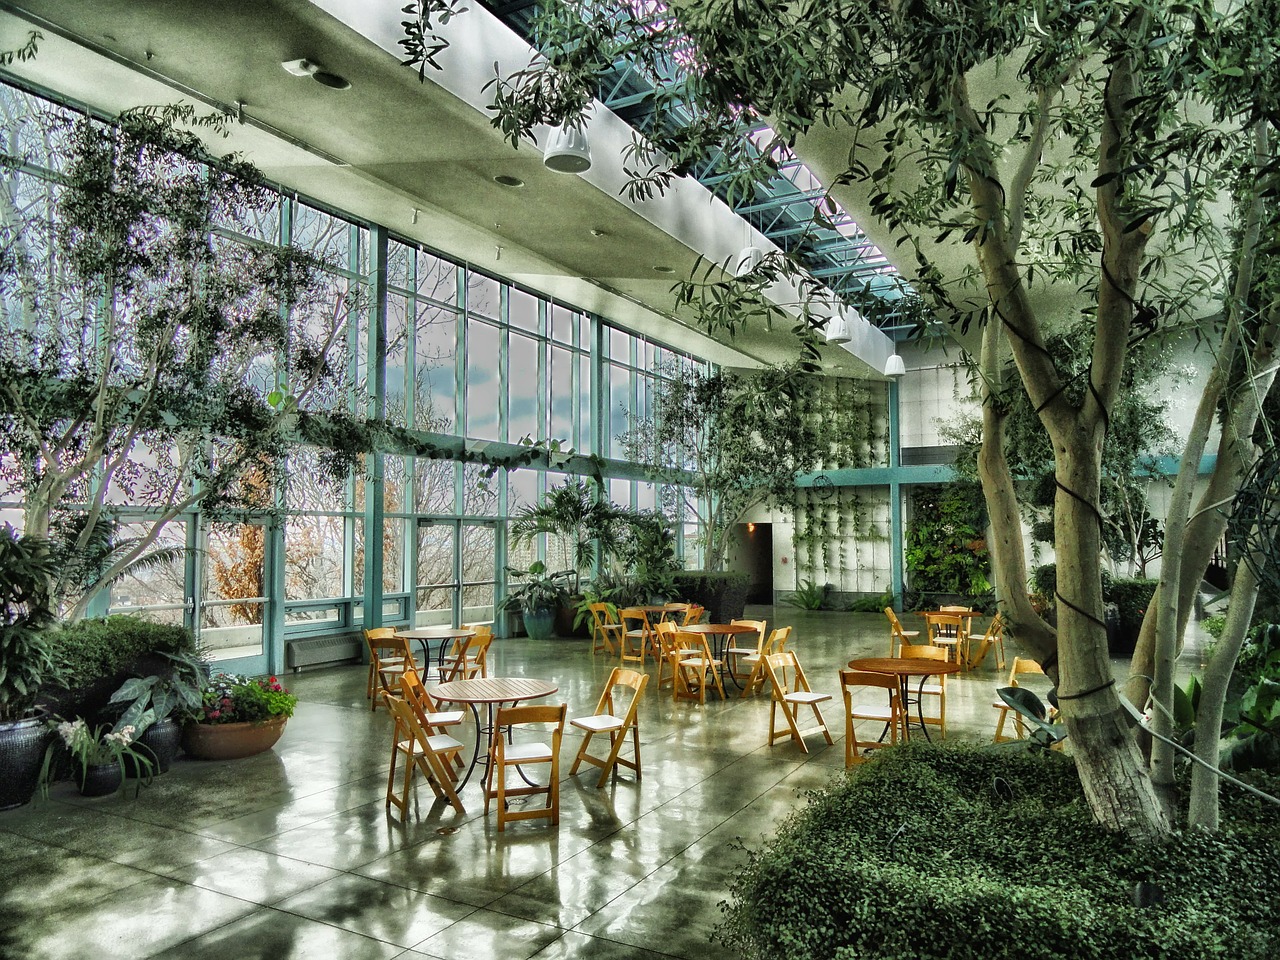 An open indoor area with tables and chairs surrounded by indoor raised garden beds filled with small shrubs and trees with a large window looking outside.